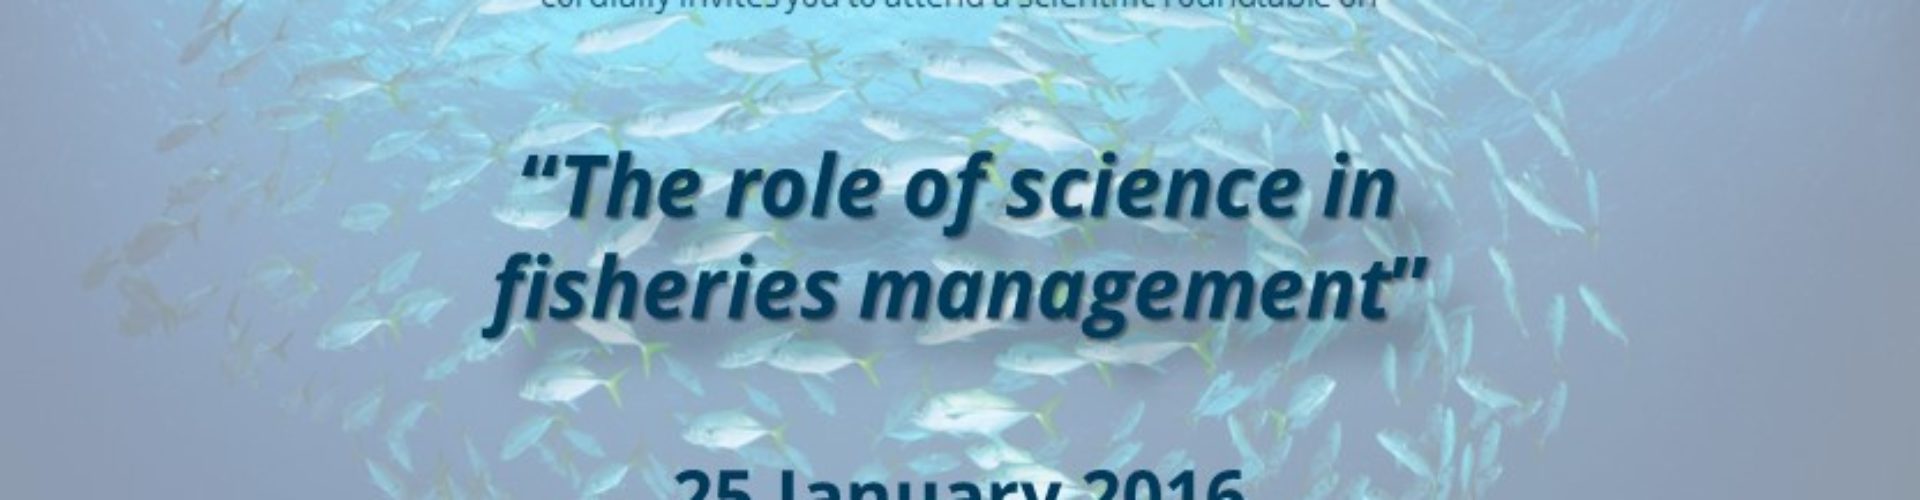 The role of science in fisheries management